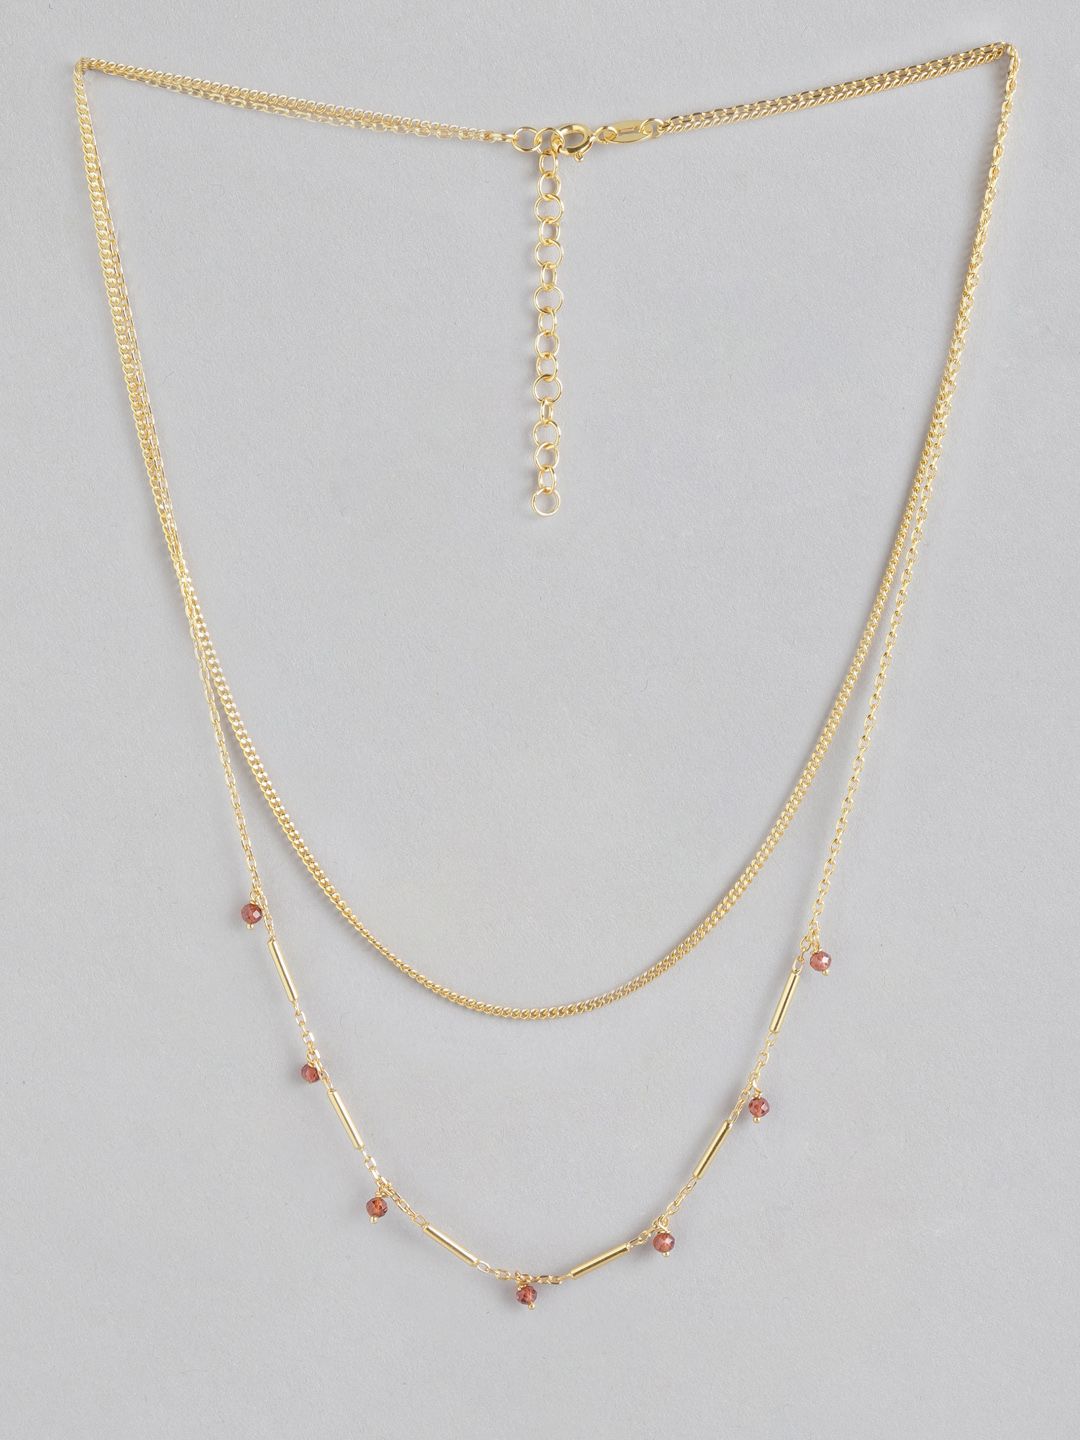 Carlton London Gold-Plated Red Garnet Studded Layered Necklace Price in India